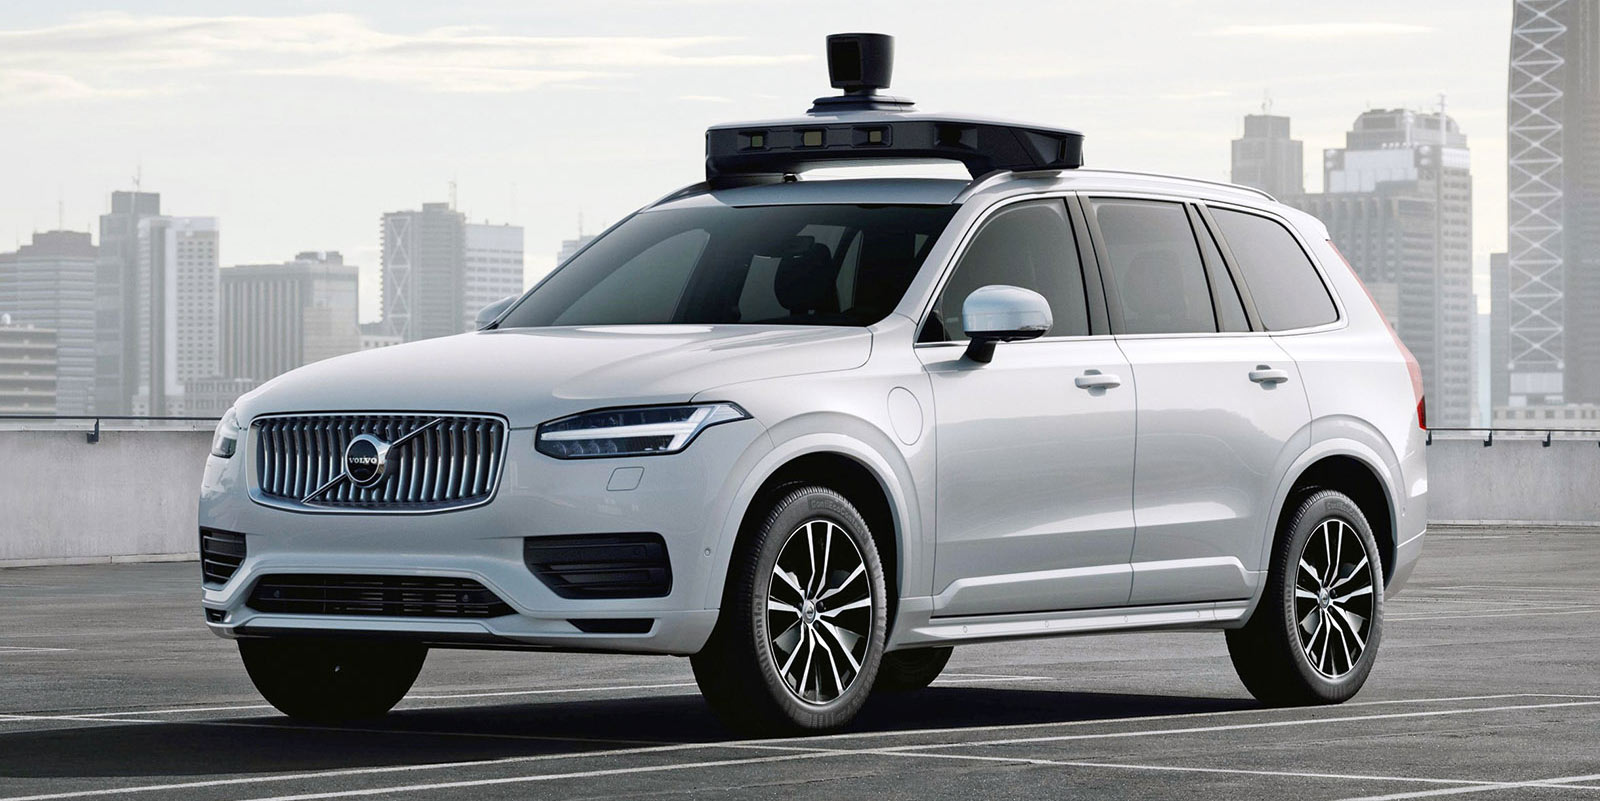 Volvo currently supplies vehicles for Uber's self-driving program